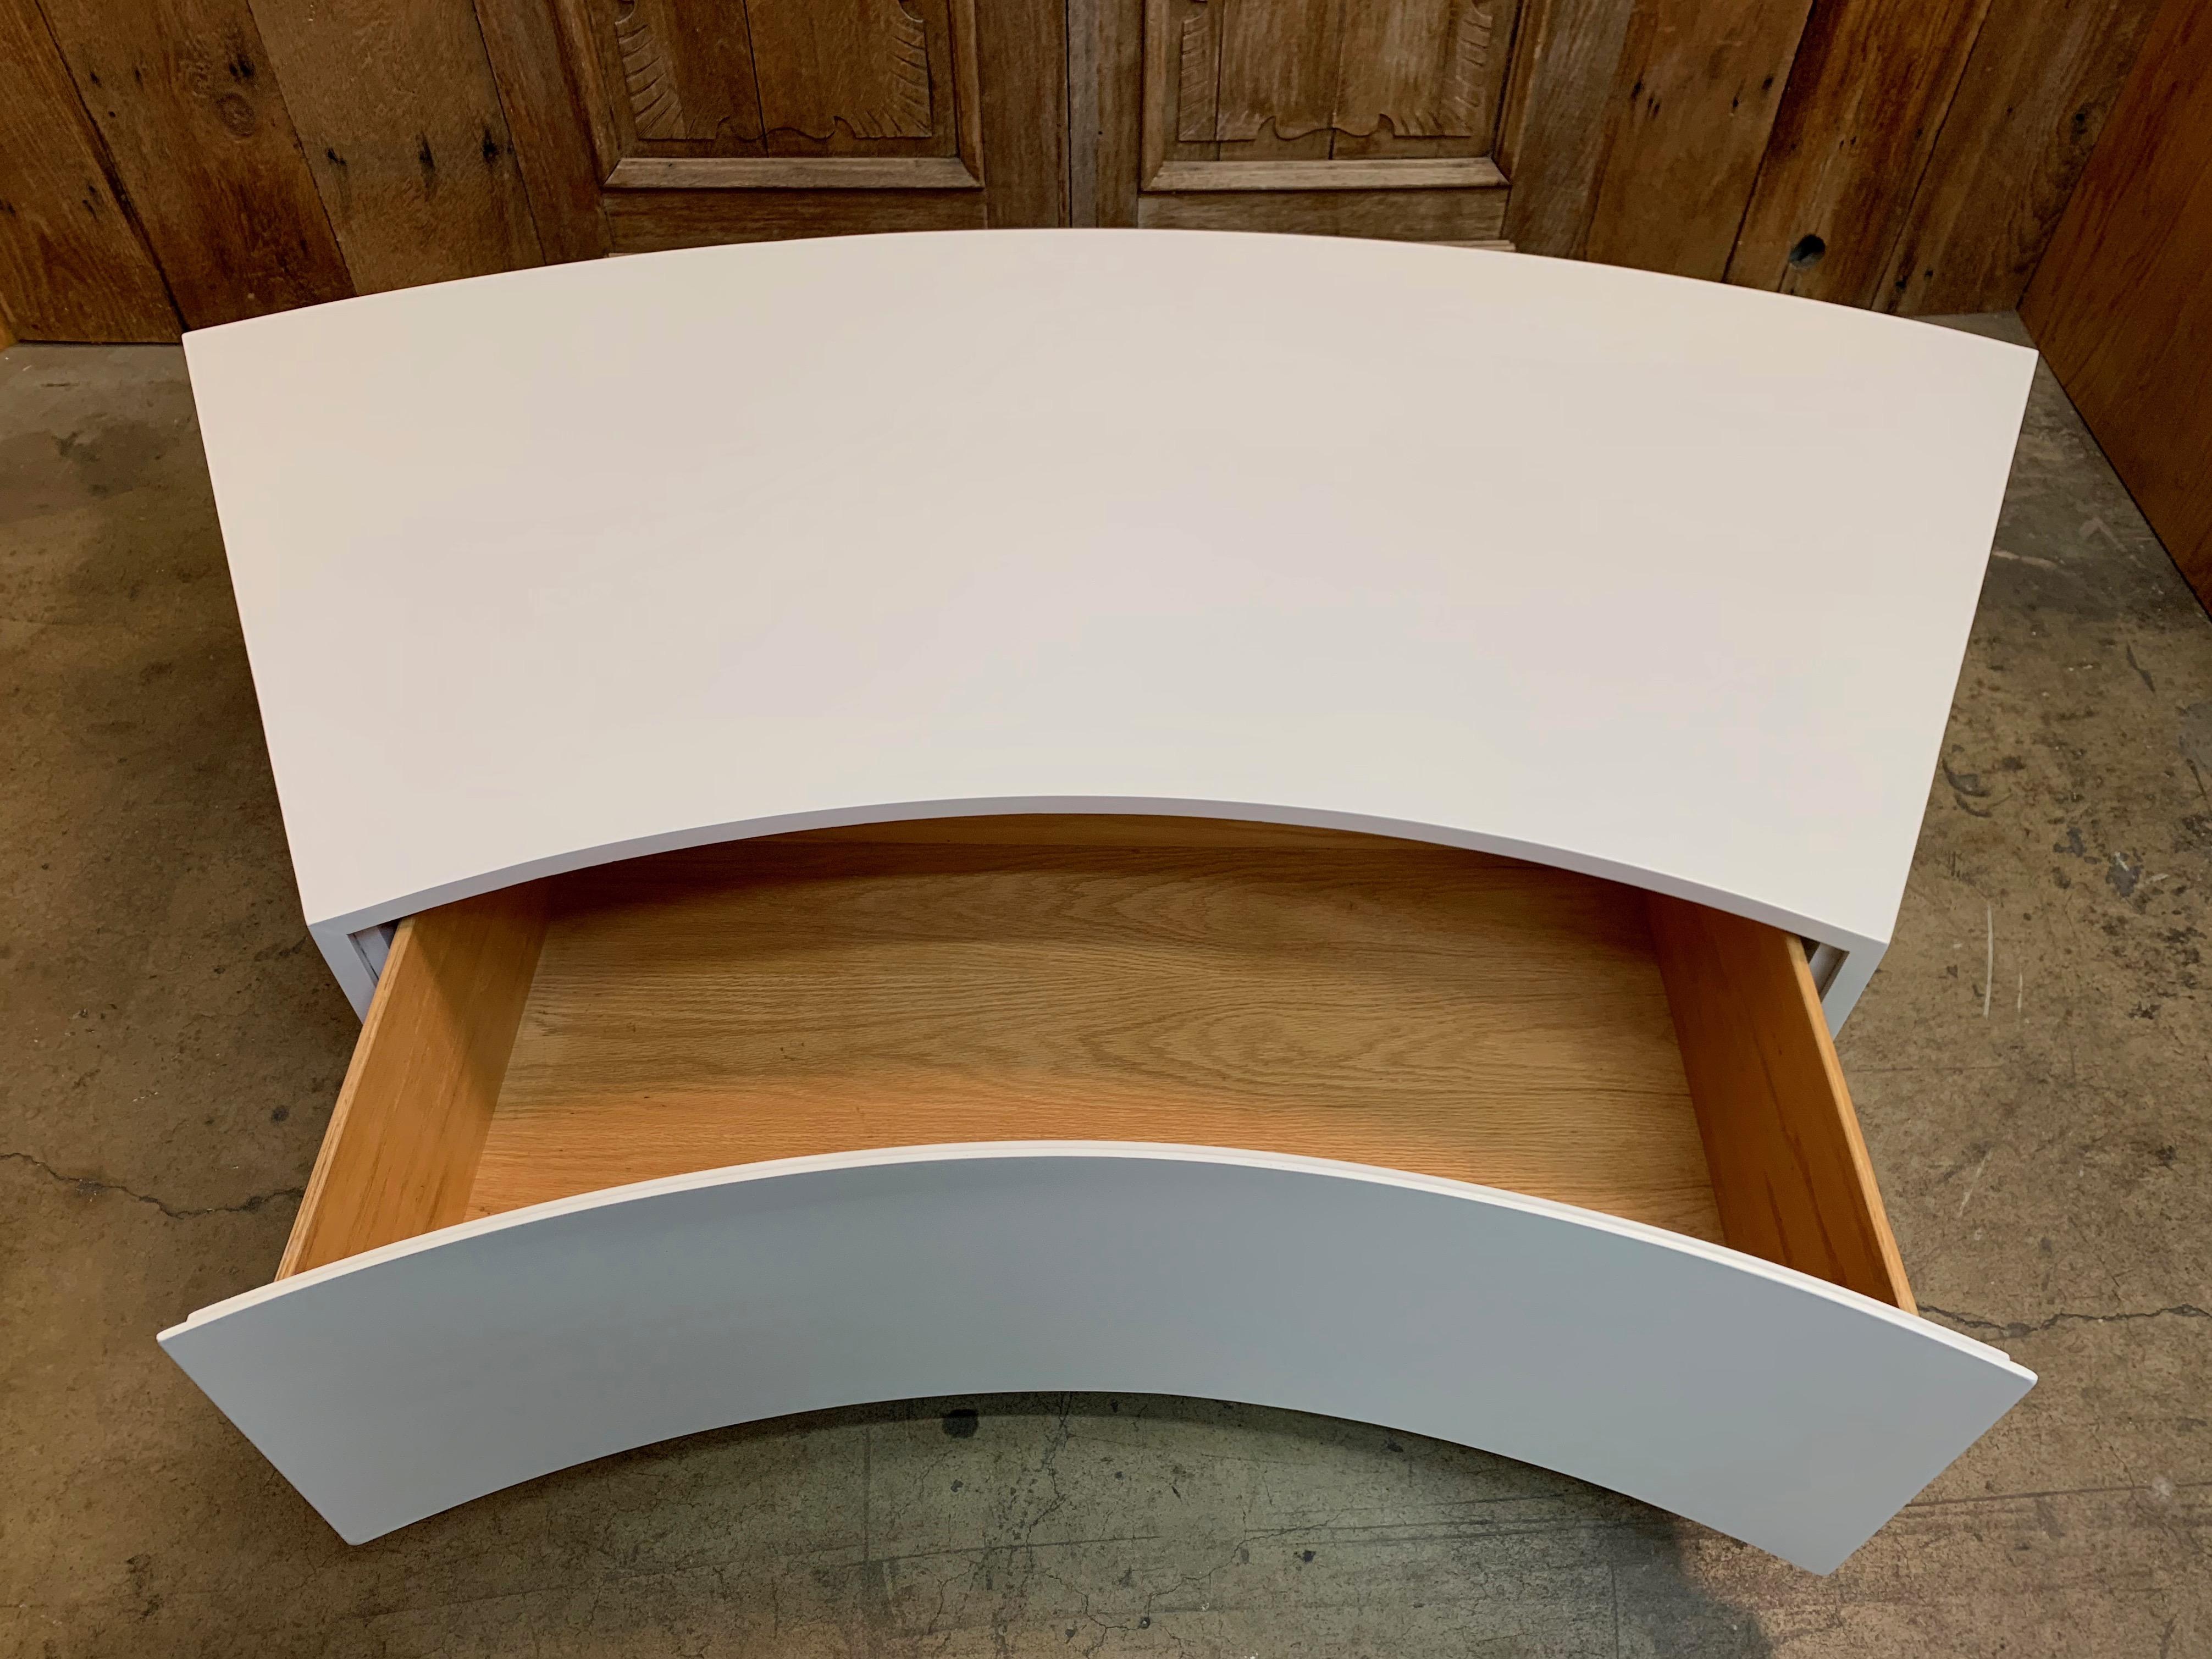 White satin lacquer over wood atop Lucite support bars with curved front drawer 
Perfect for curved sofa. Can also be used as a coffee table